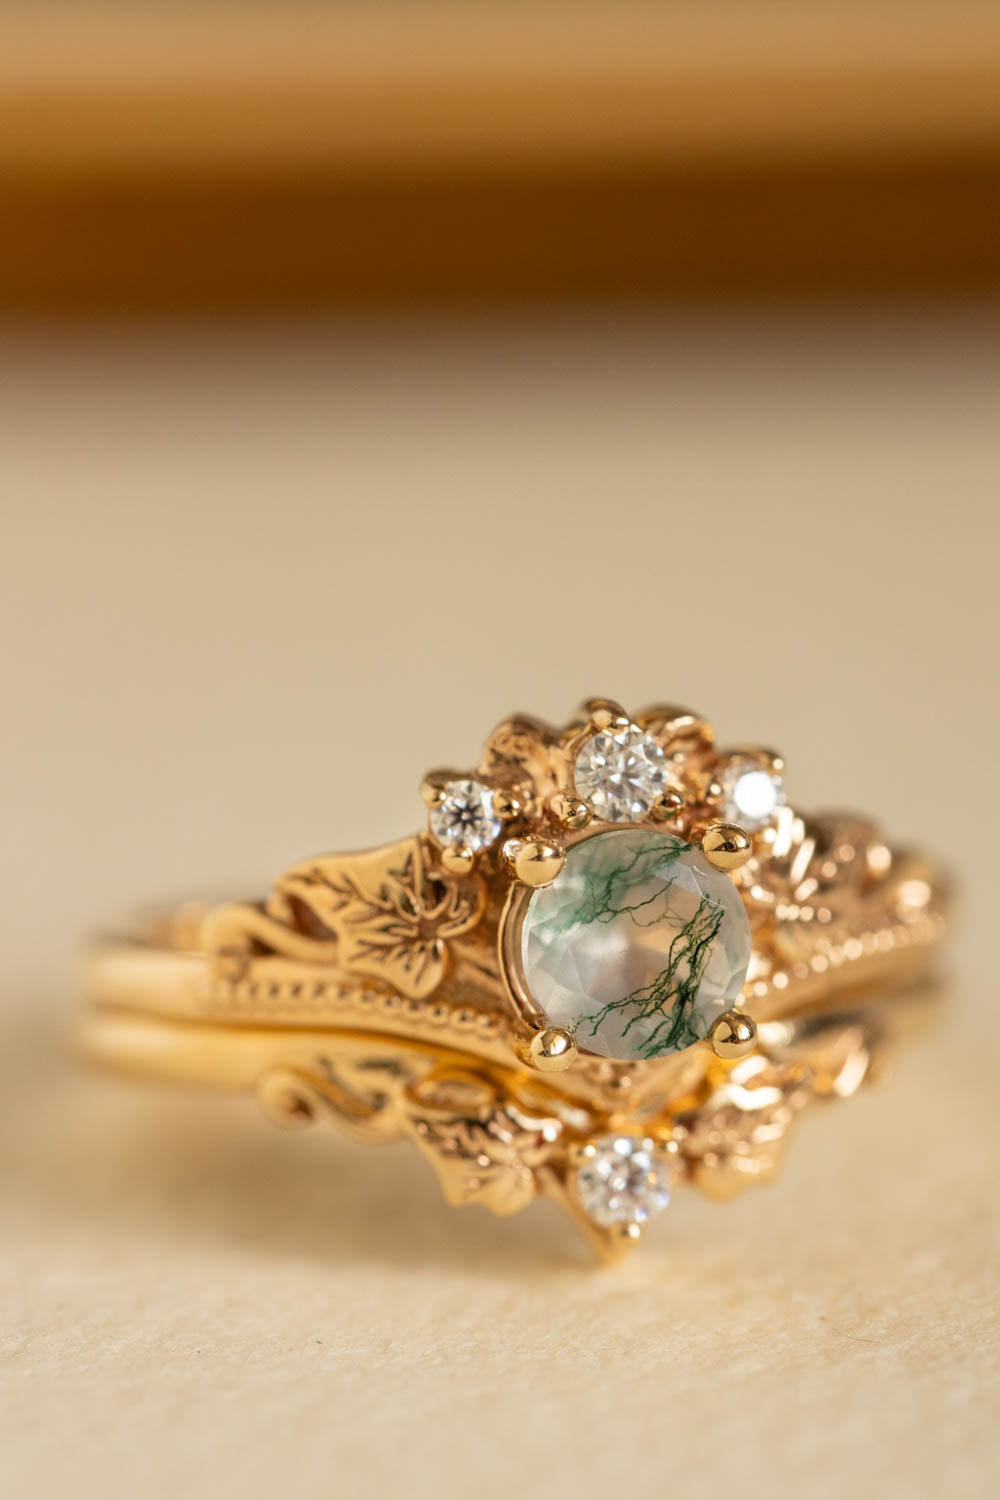 READY TO SHIP: Ariadne bridal ring set in 14K yellow gold, natural moss agate 5 mm, moissanites, RING SIZE - 6 US - Eden Garden Jewelry™